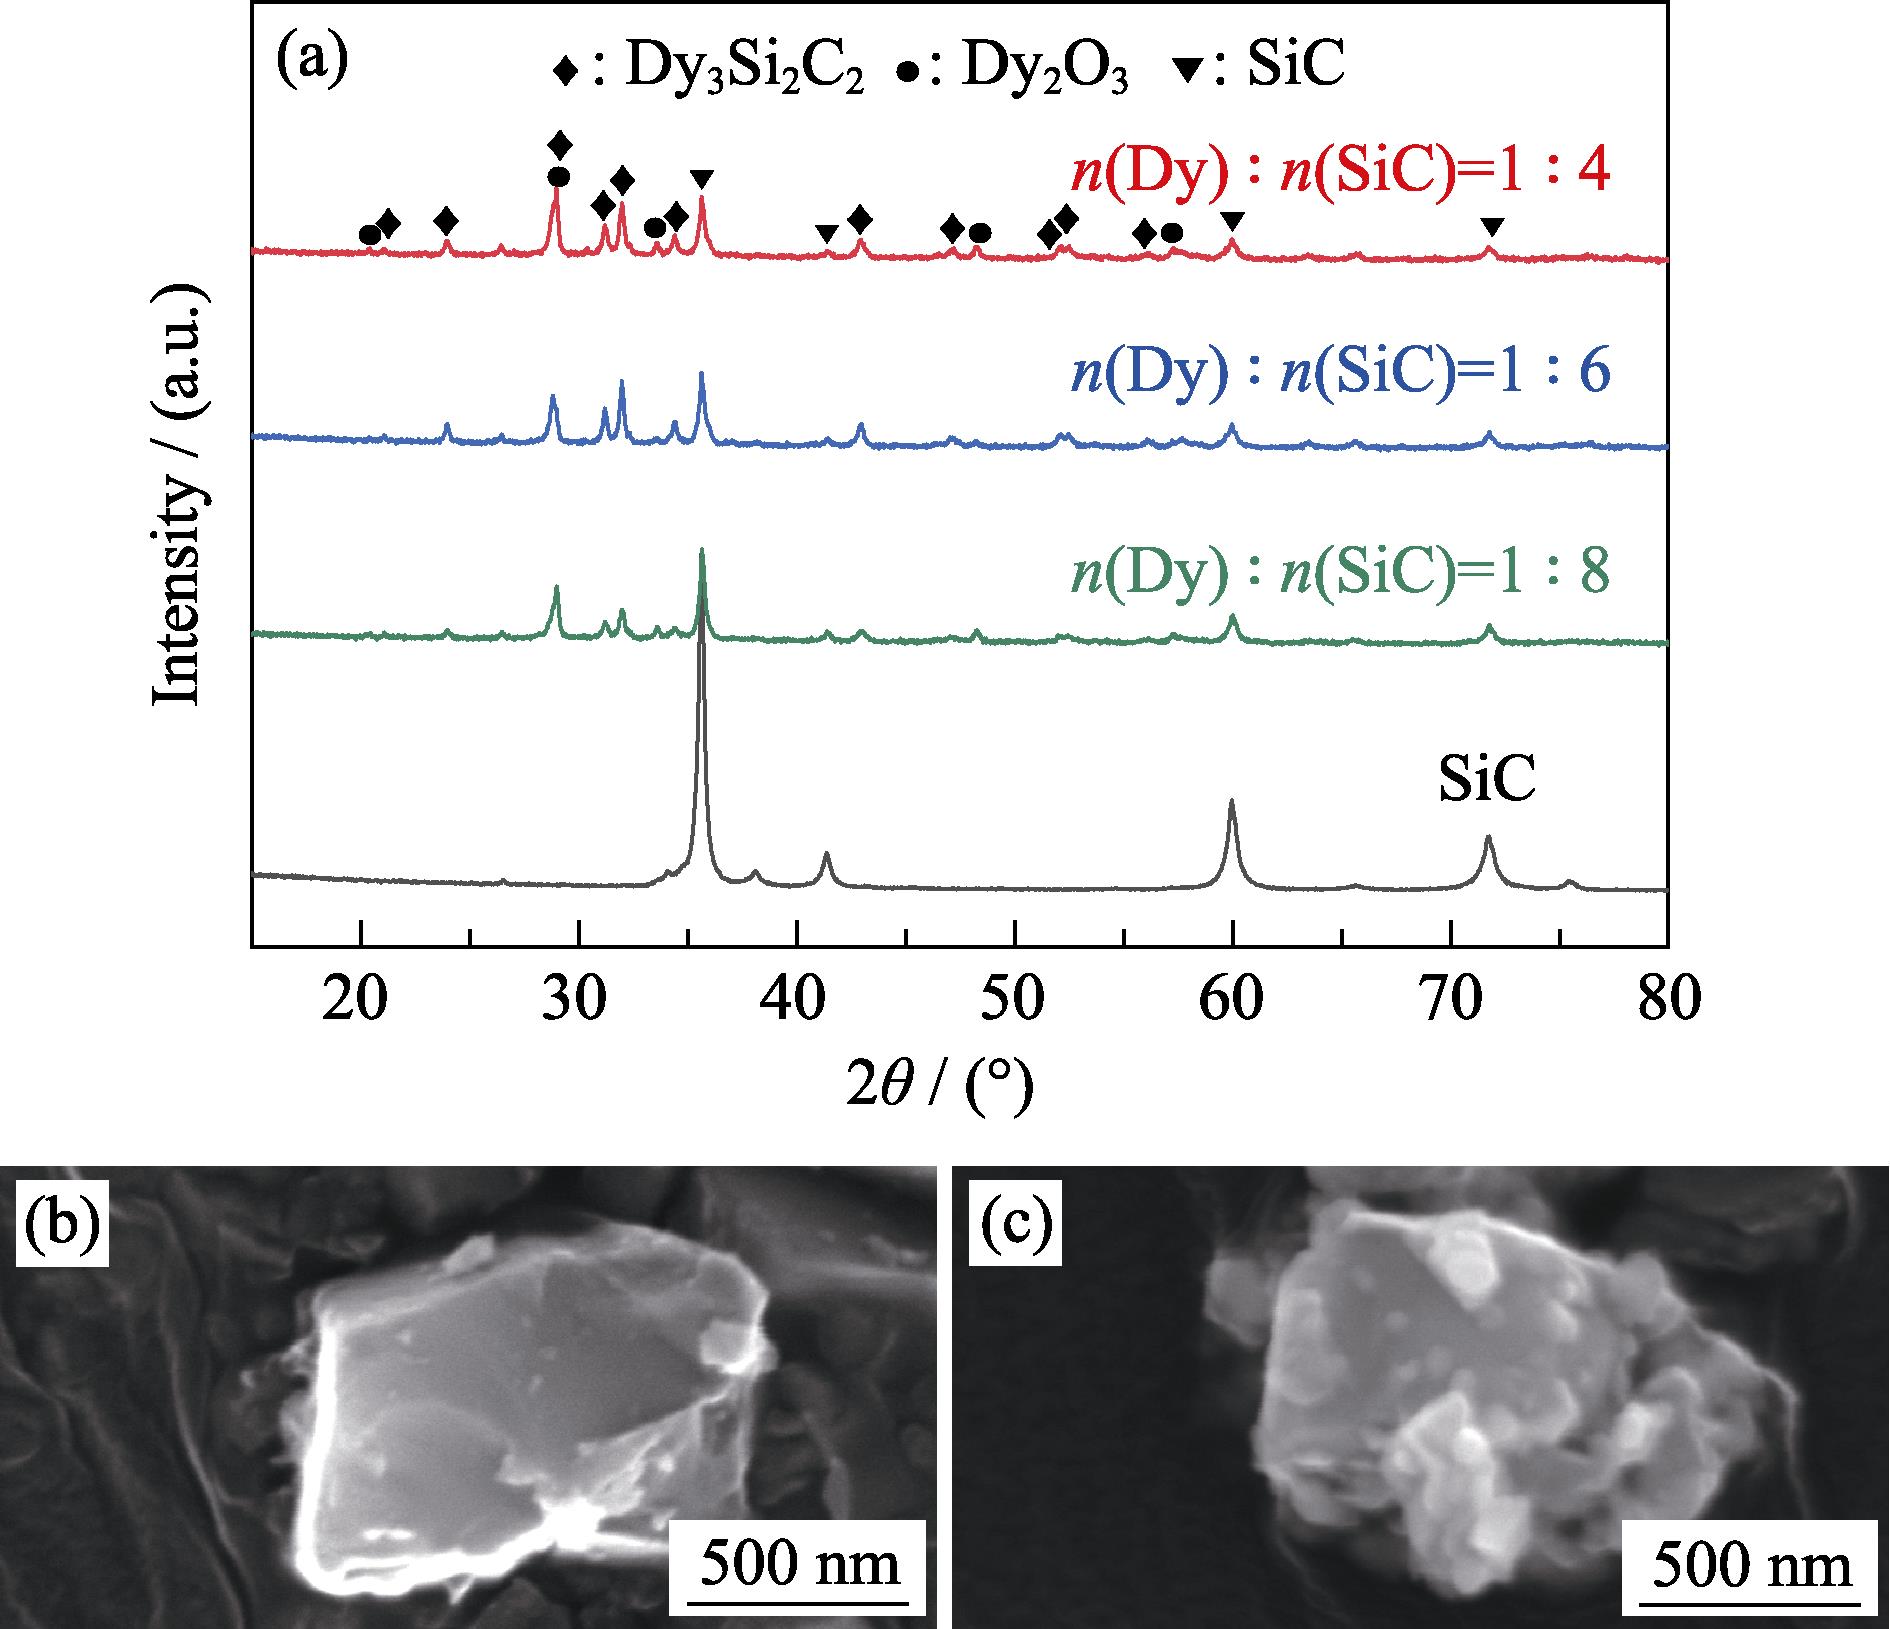 (a) XRD patterns of the SiC and SiC-Dy3Si2C2 raw materials prepared with different molar ratios, SEM images of (b) SiC and (c) SiC-Dy3Si2C2